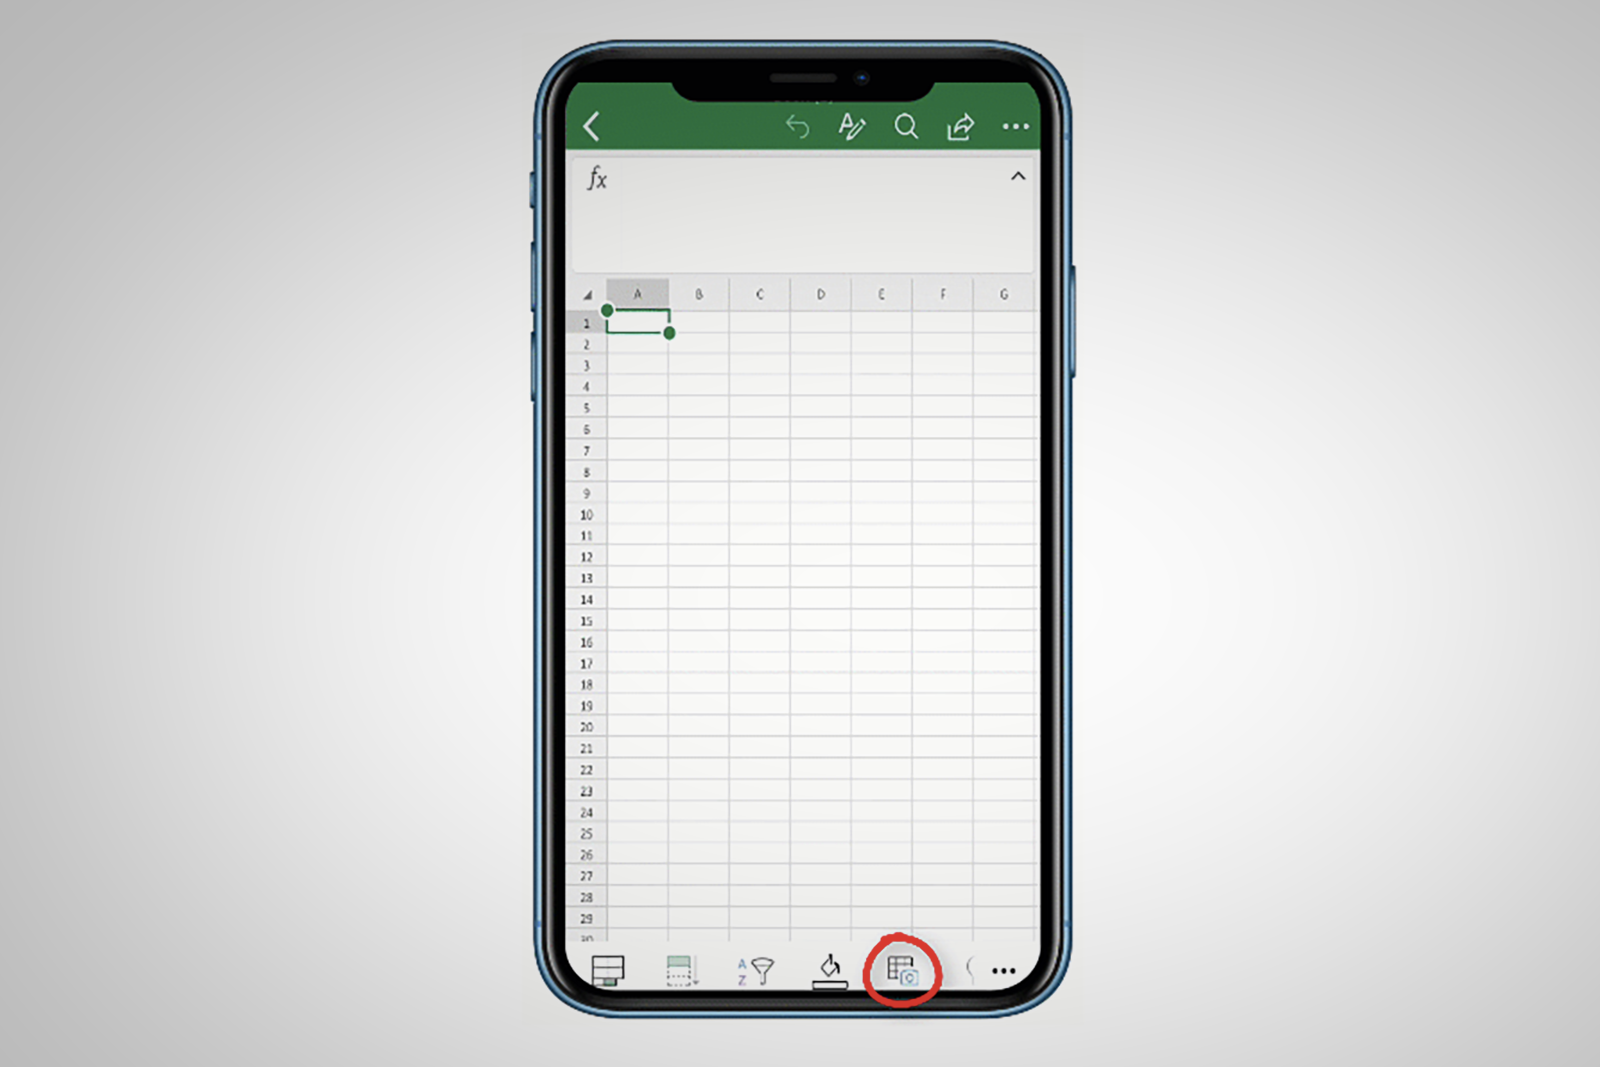 How To Use The Excel App To Photograph And Import Printed Spreadsheets image 4